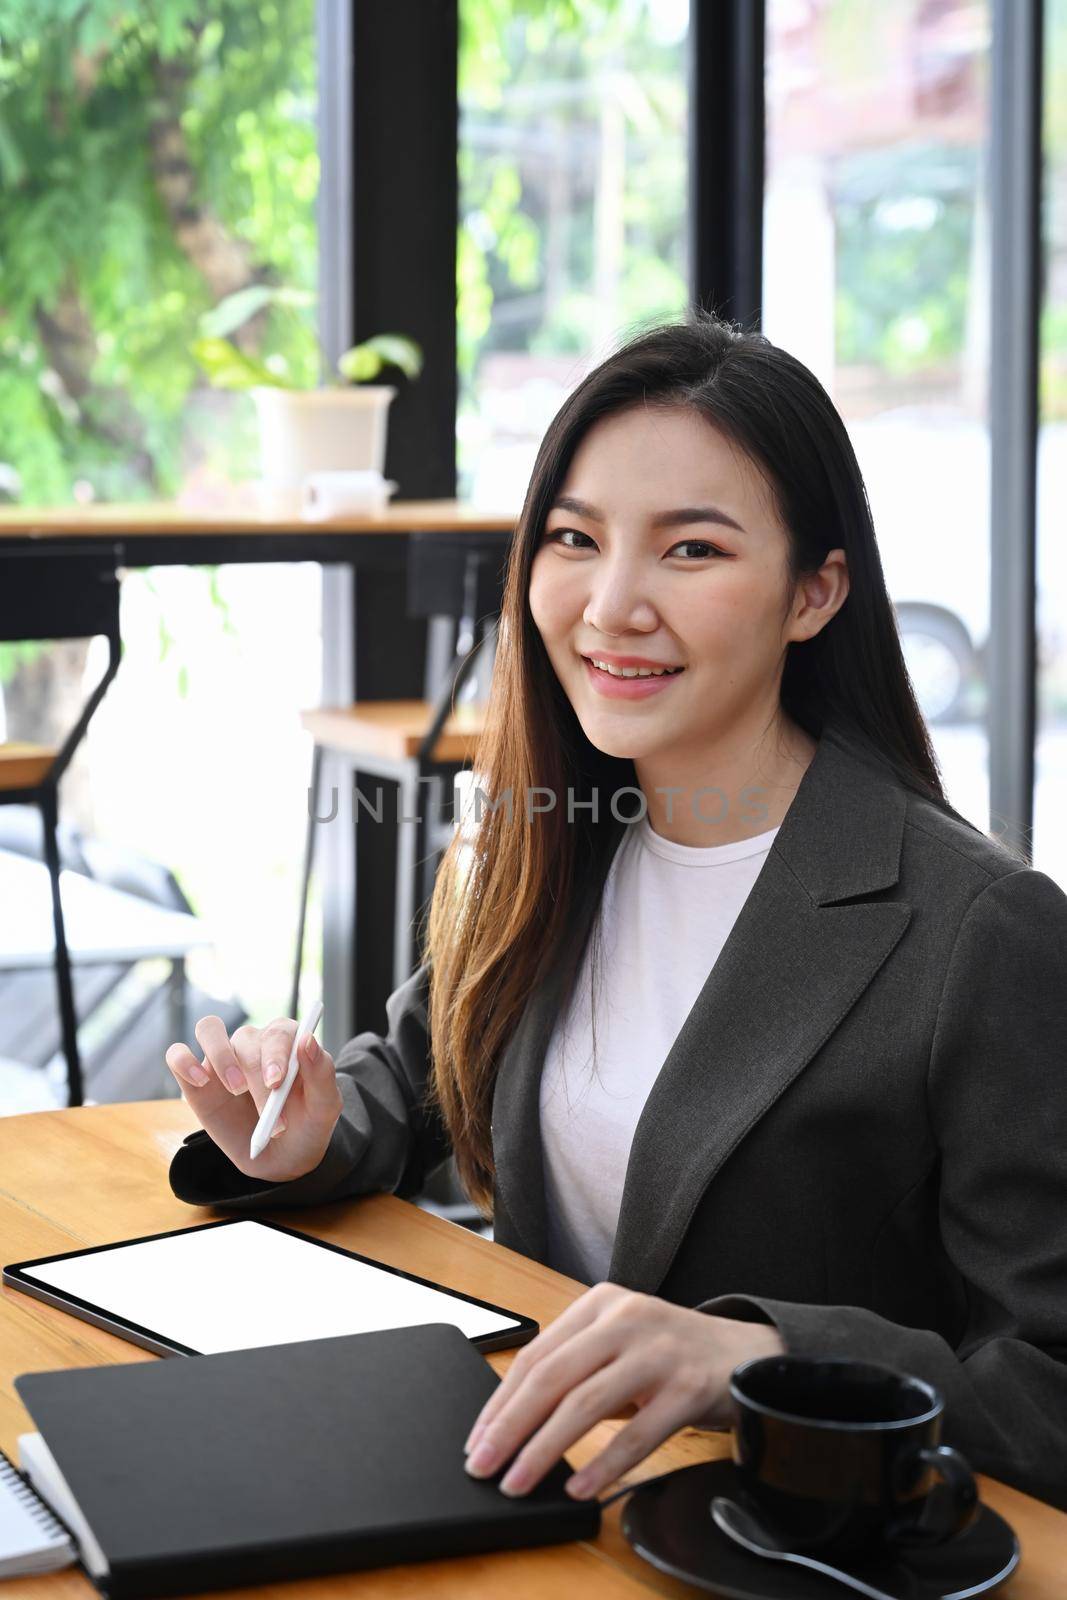 Attractive businesswoman sitting in office and smiling to camera. by prathanchorruangsak